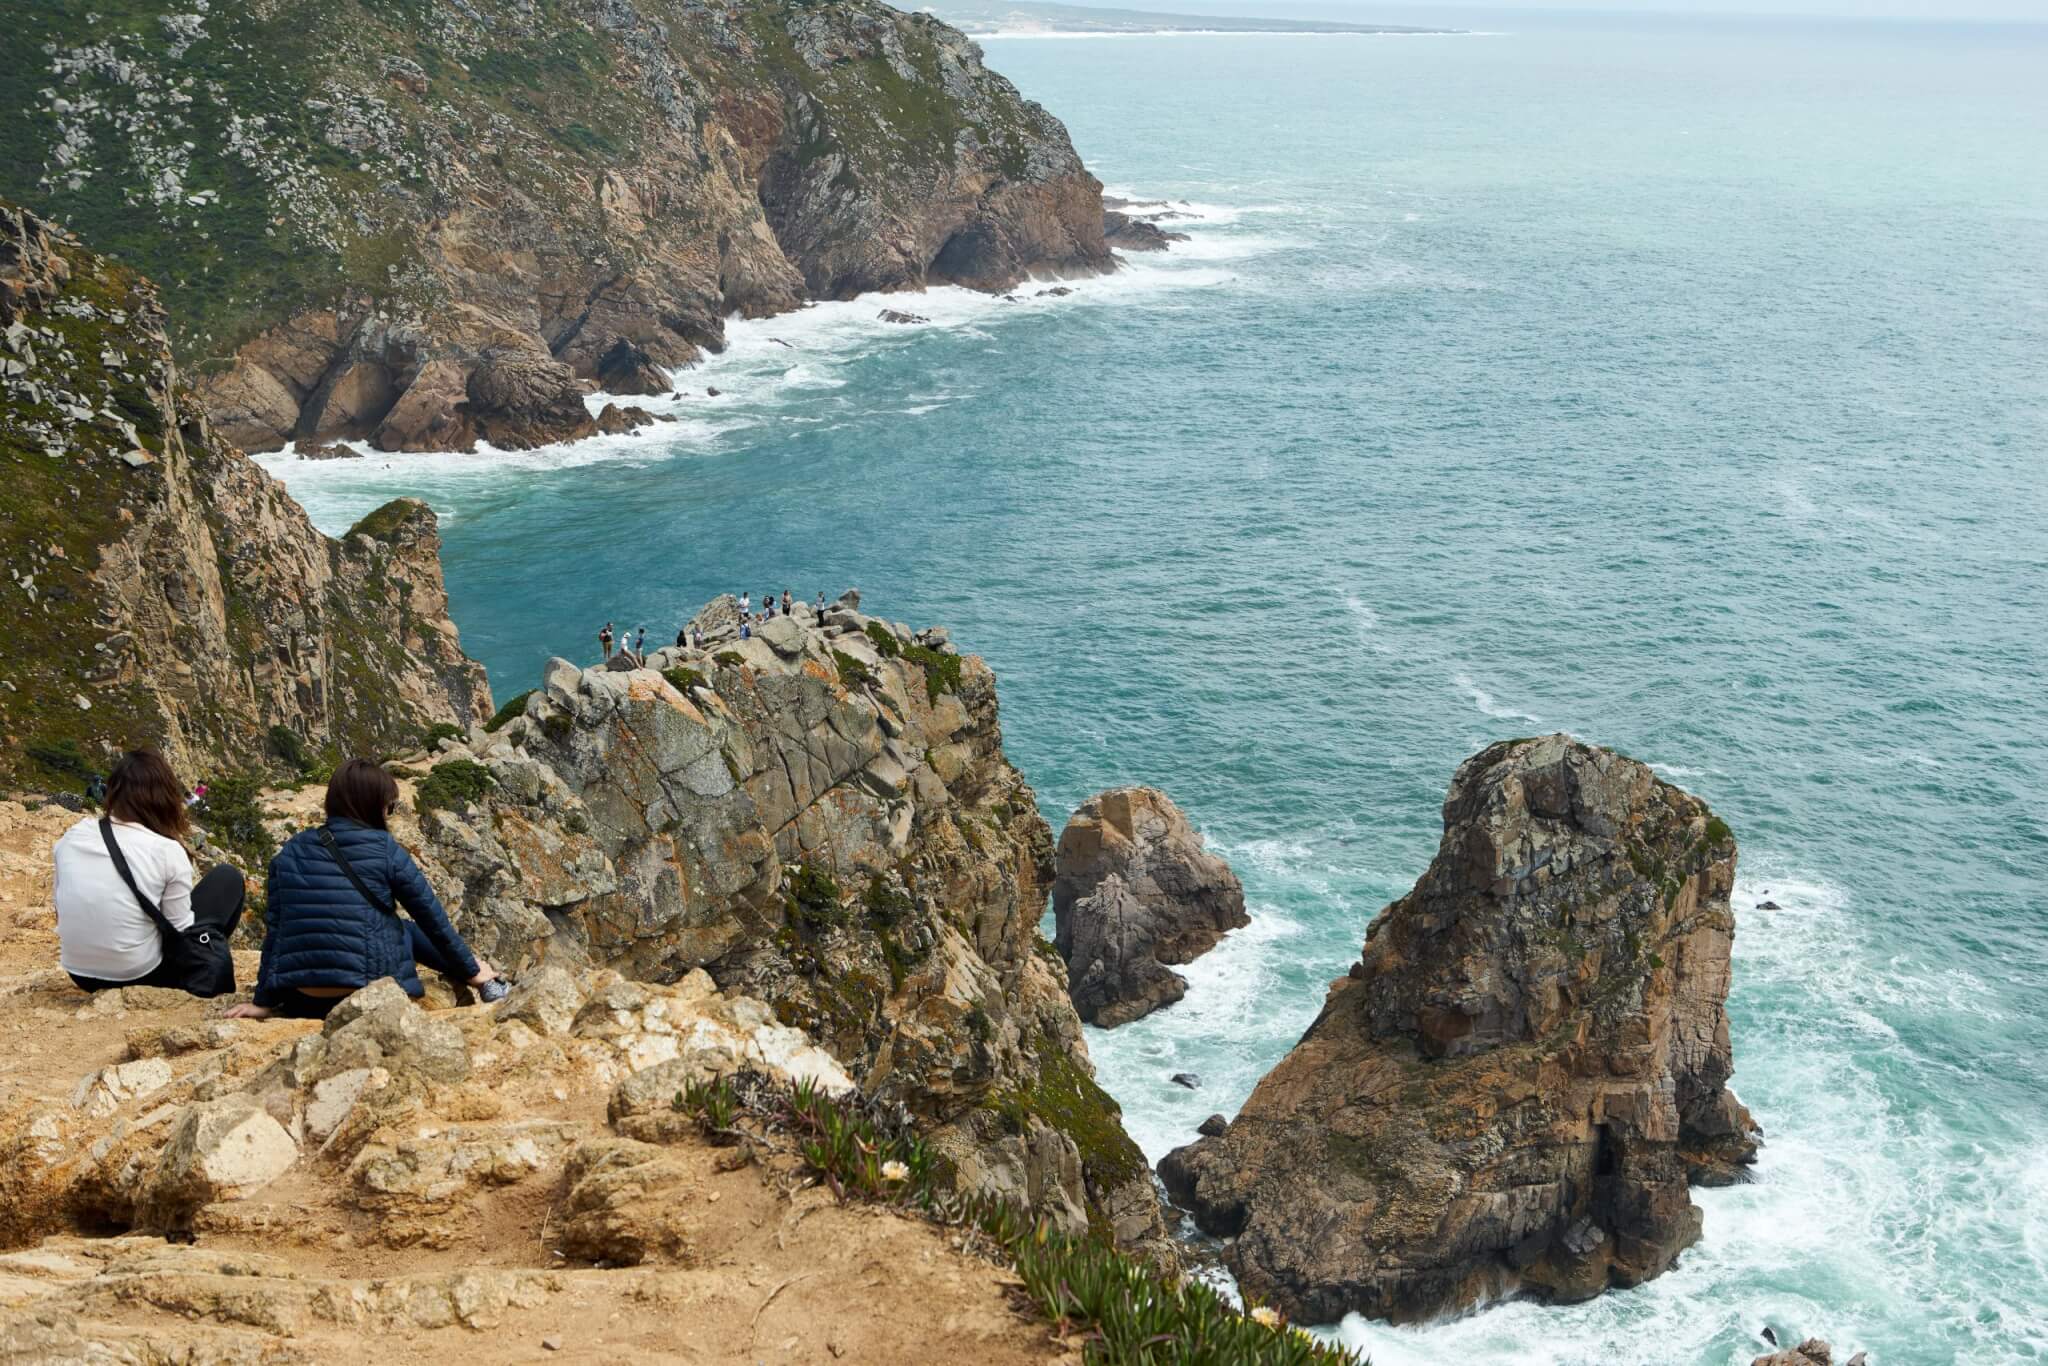 Cabo da Roca - Most western point of Europe